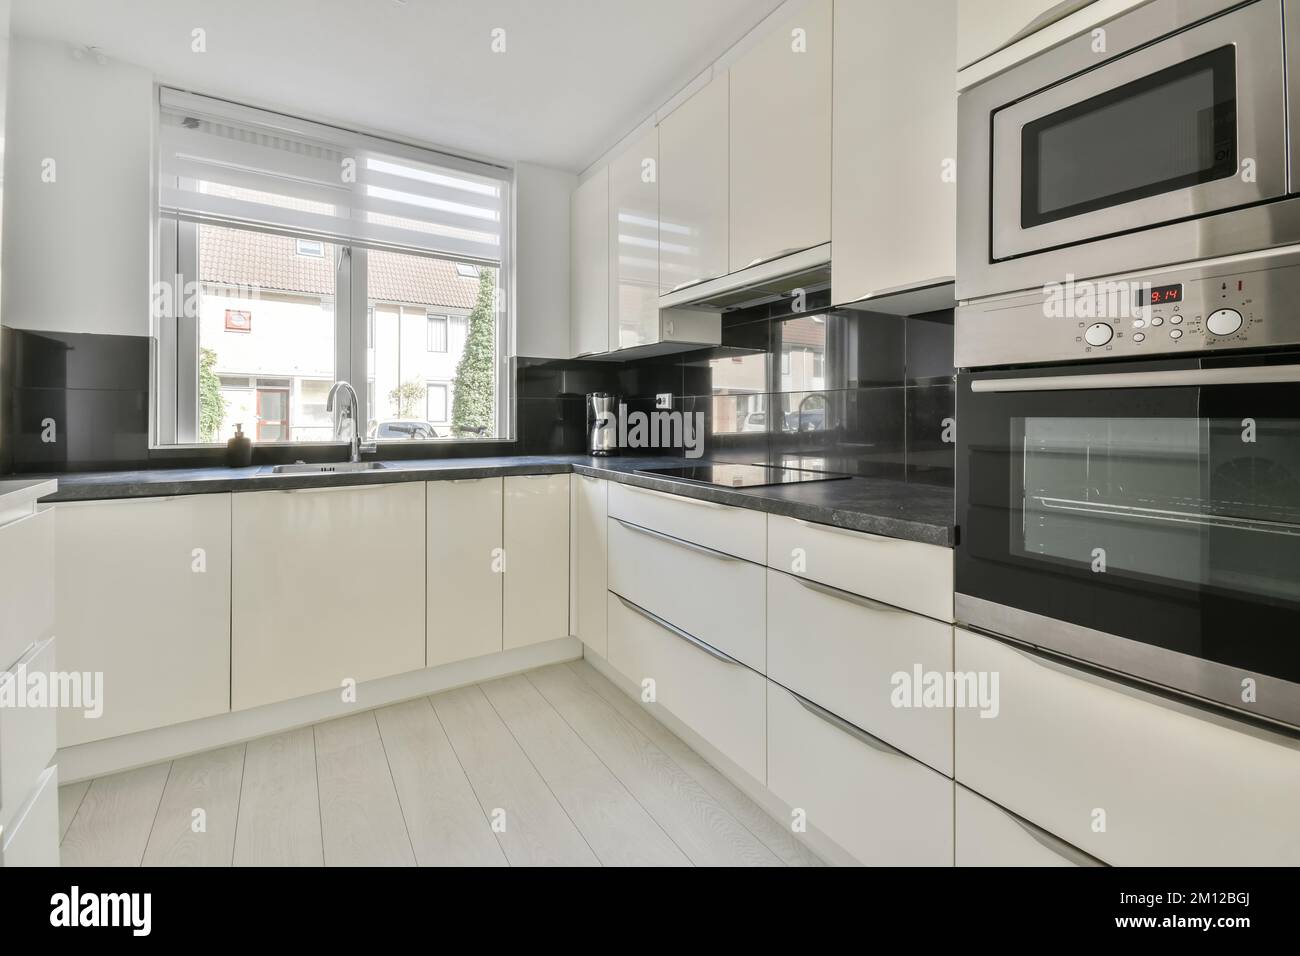 a modern kitchen with white cabinets and black counter tops on the counters in this photo is taken from the inside Stock Photo